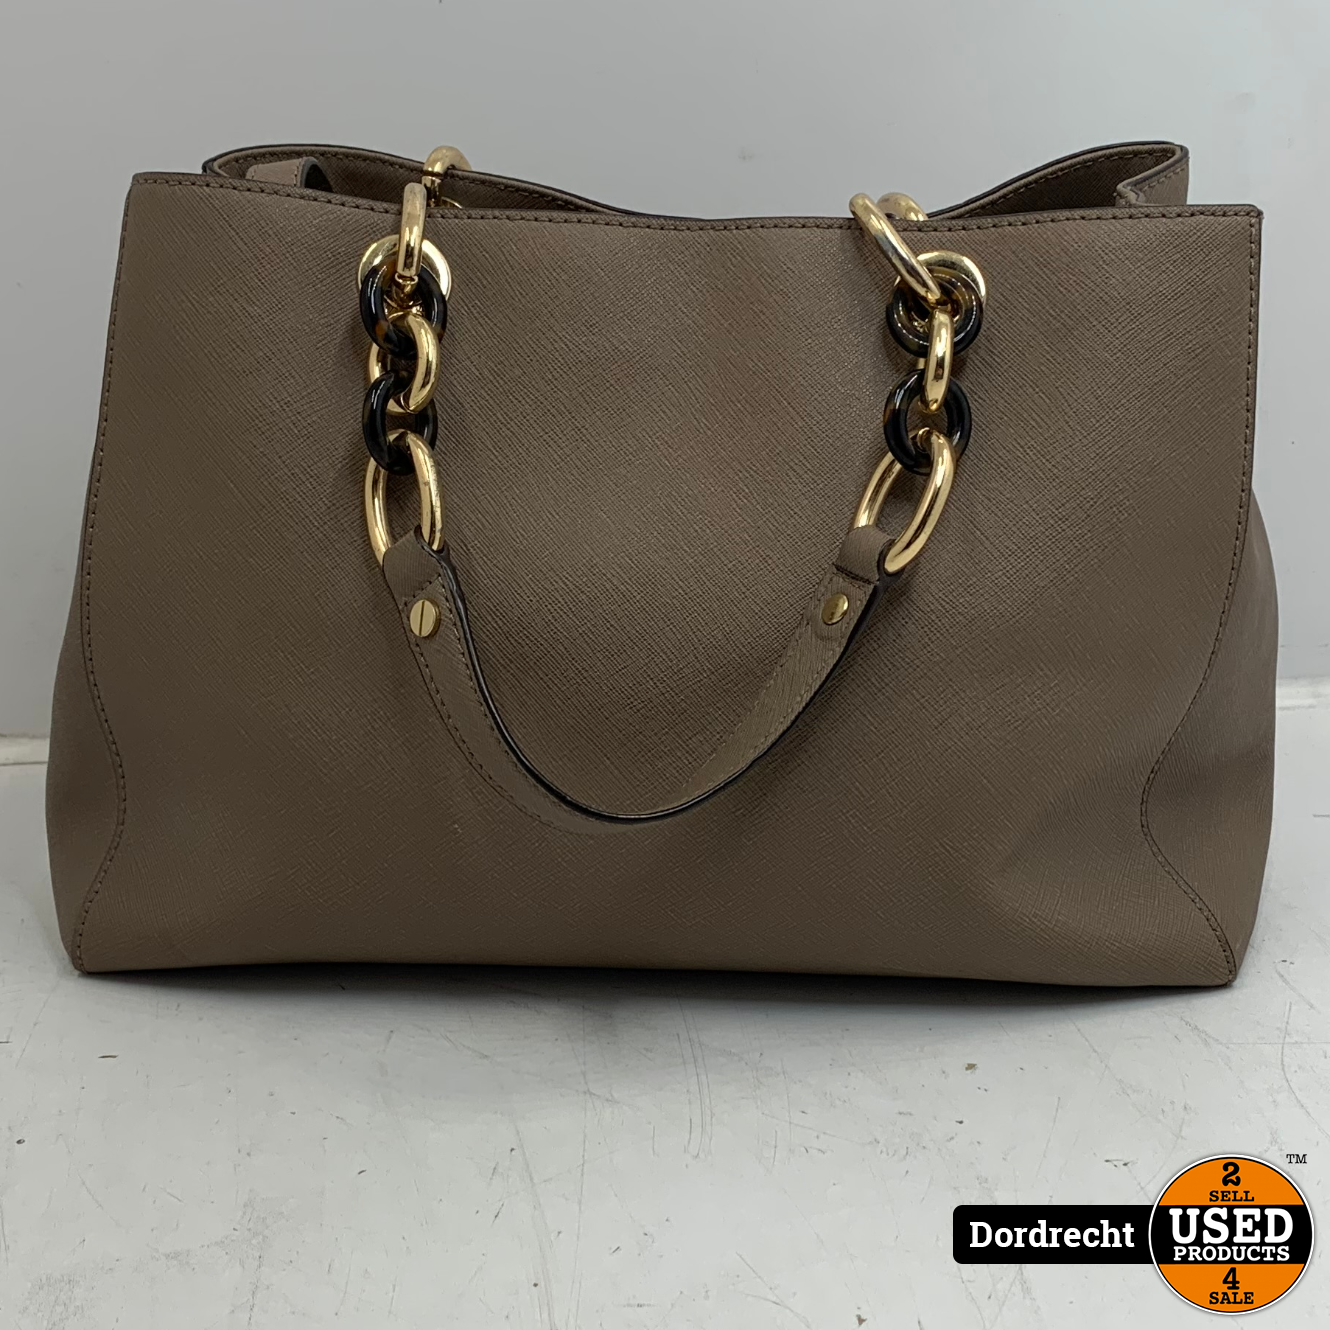 analogie pijp Alert Michael Kors tas Cynthia Taupe | Nette staat - Used Products Dordrecht